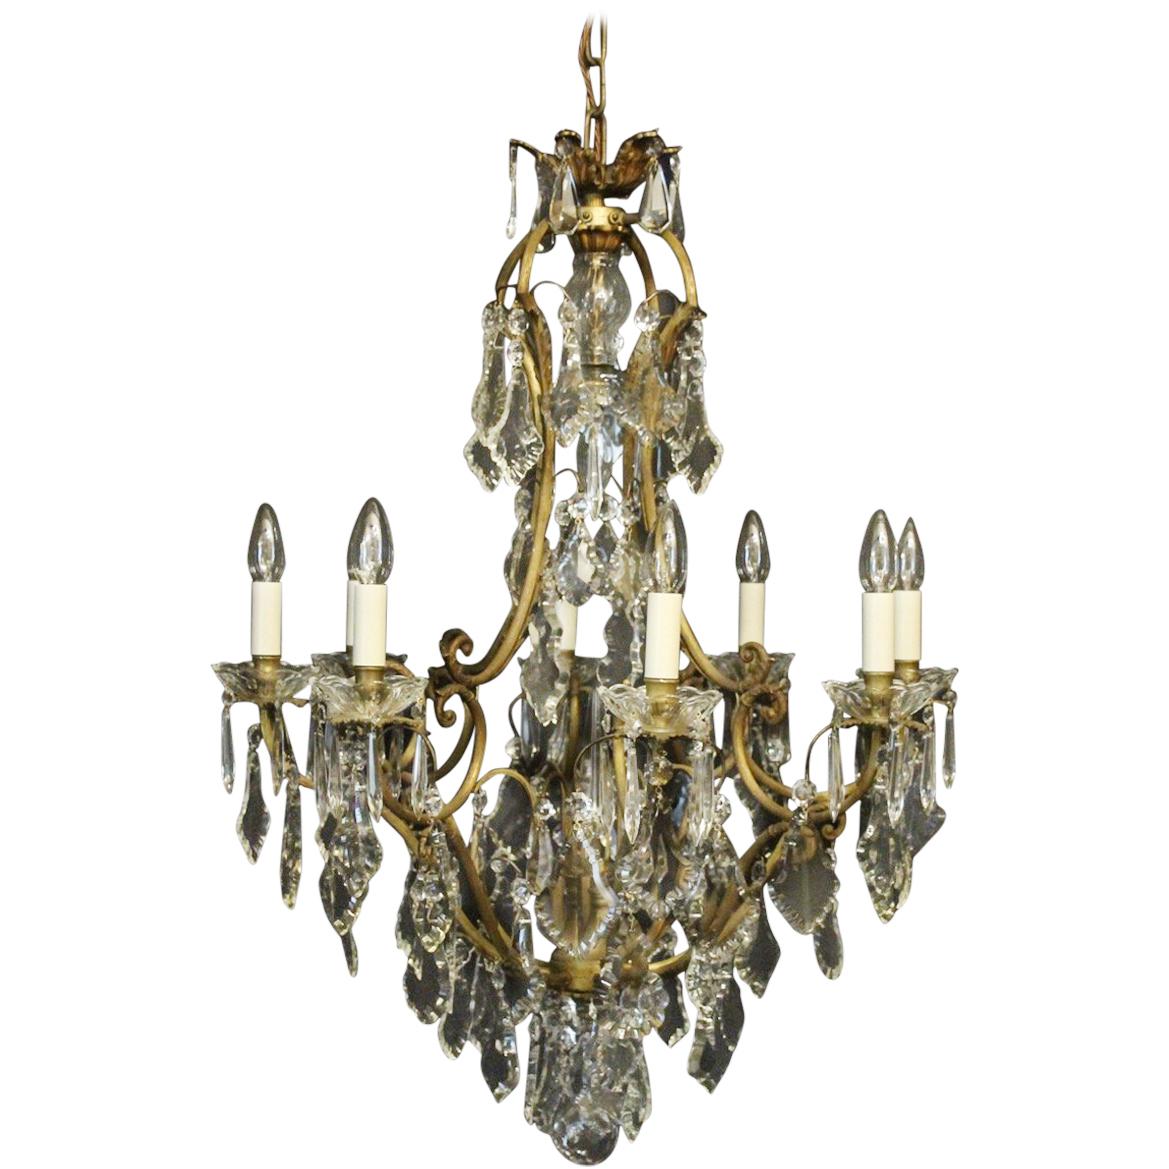 French, 19th Century Gilded and Crystal 9-Light Antique Chandelier For Sale